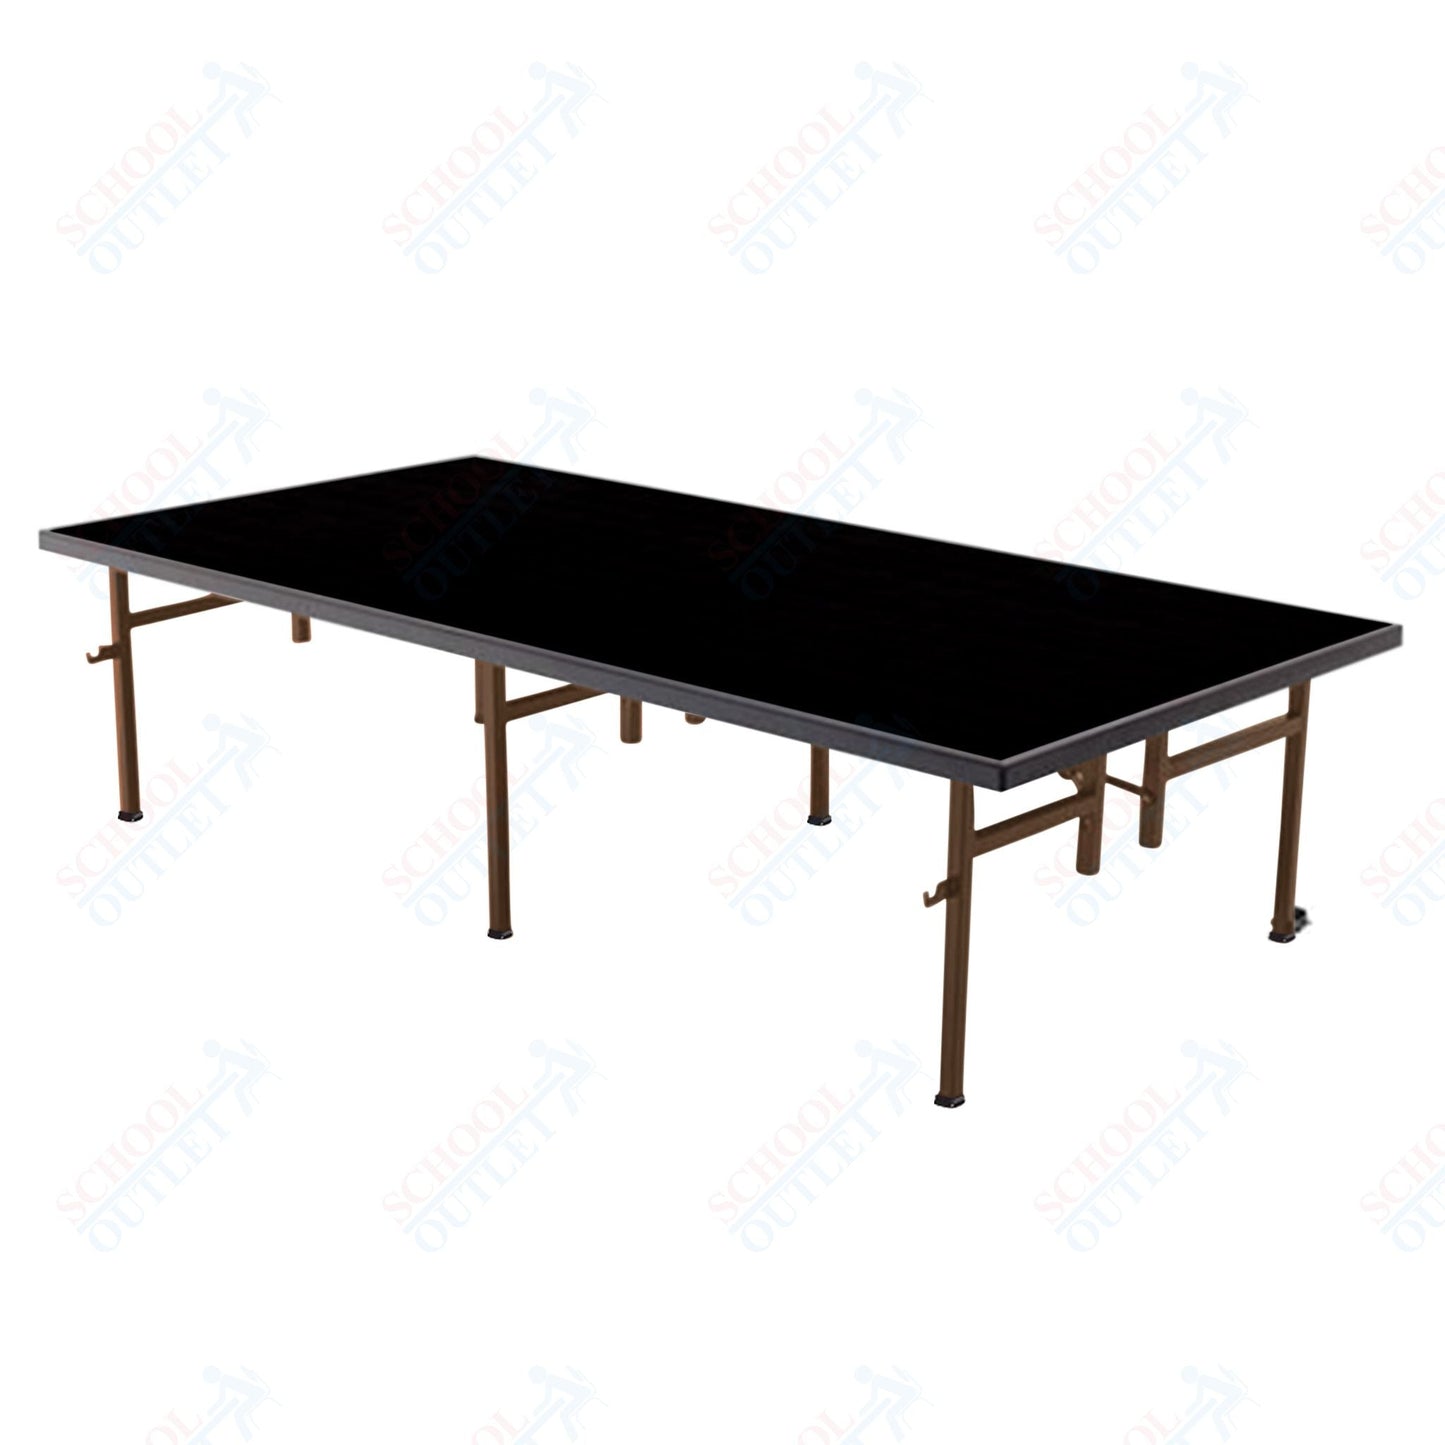 AmTab Fixed Height Stage - Polypropylene Top - 48"W x 96"L x 16"H (AmTab AMT - ST4816P) - SchoolOutlet